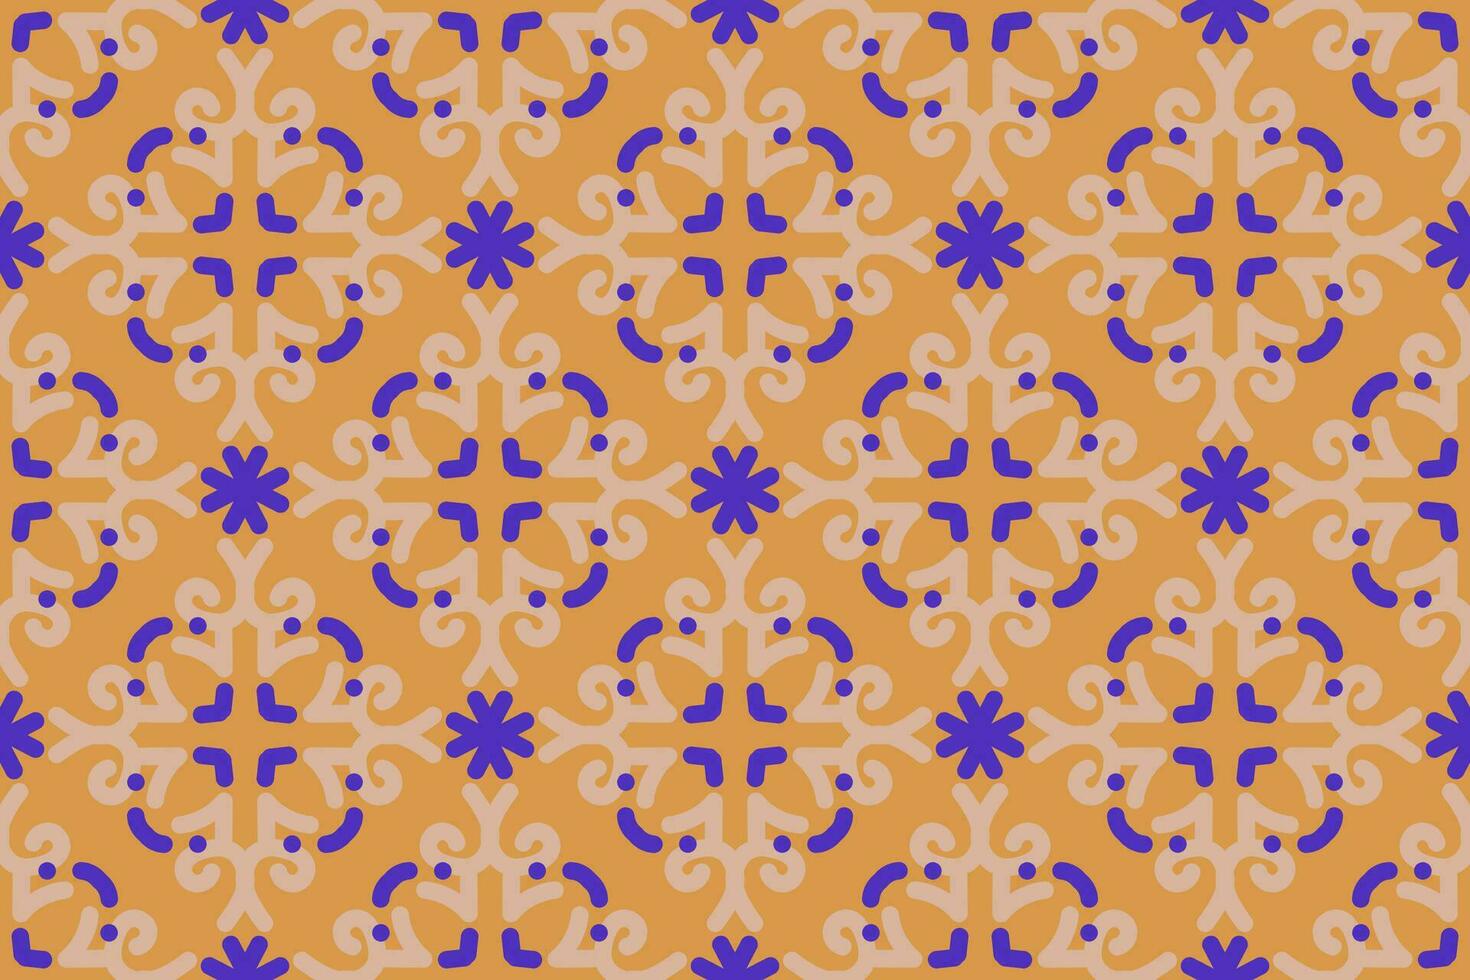 oriental pattern. orange and blue background with Arabic ornaments. Patterns, background and wallpaper for your design. Textile ornament. Vector illustration.